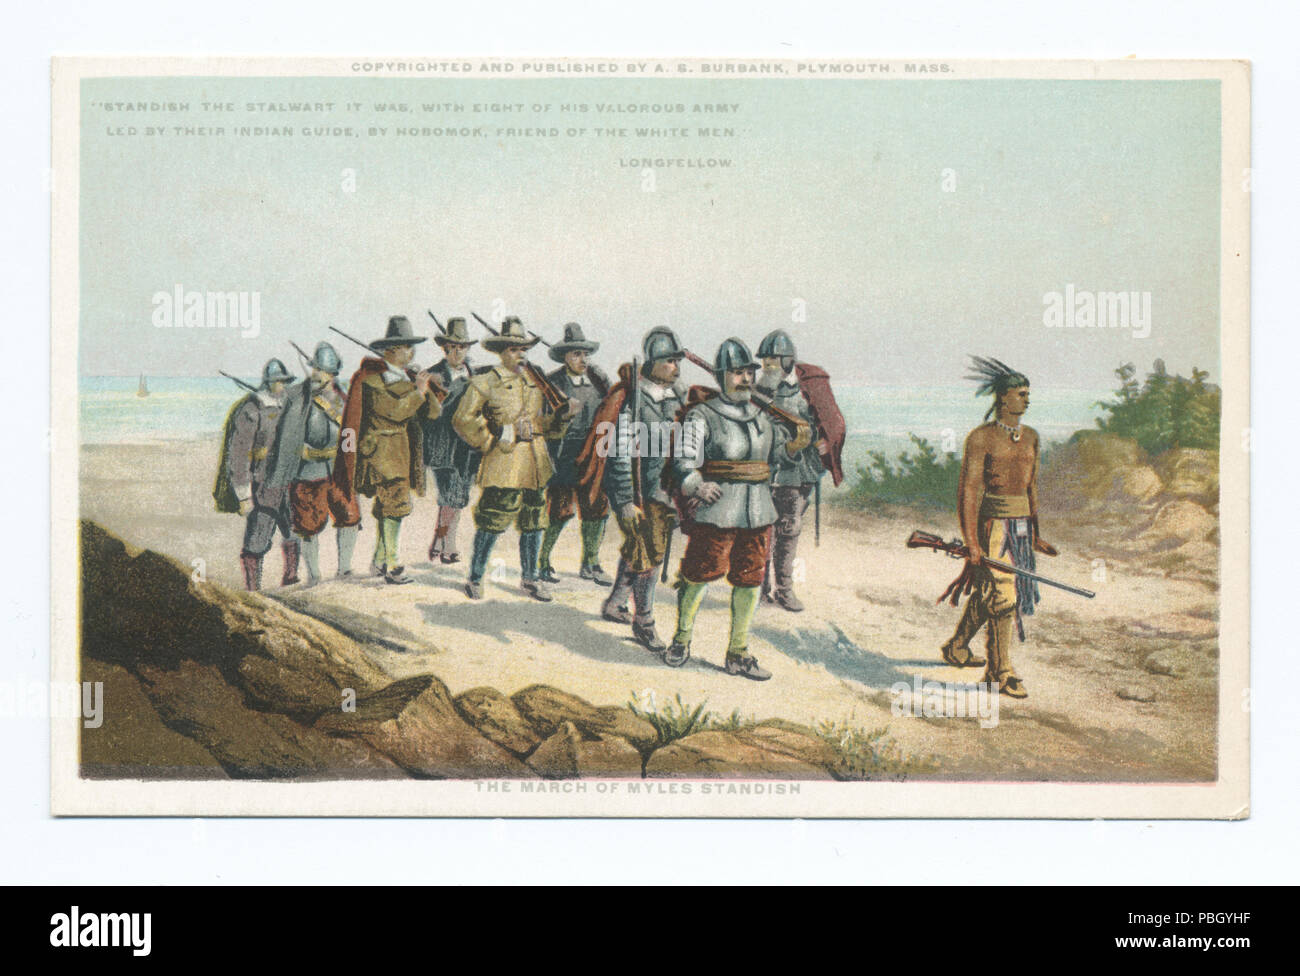 1655 The March of Myles Standish, &quot;Standish the Stalwart it was, with Eight of his Valorous Army Led by Their Indian Guide, By Hobomok, Friend of the White Men.&quot; Longfellow (NYPL b12647398-79376) Stock Photo